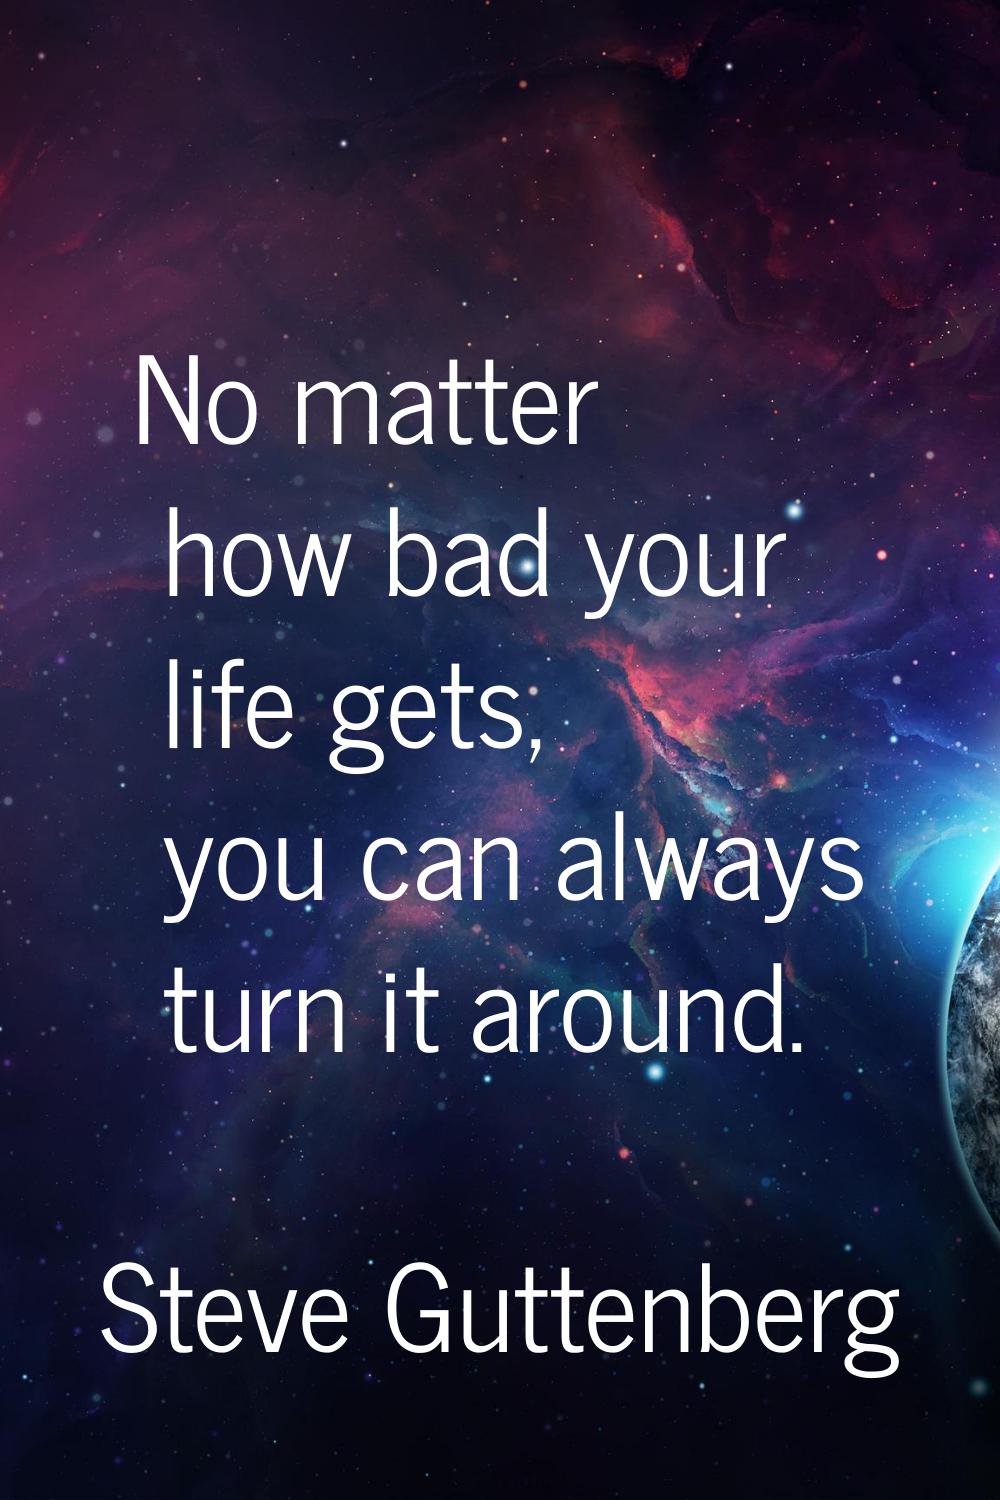 No matter how bad your life gets, you can always turn it around.